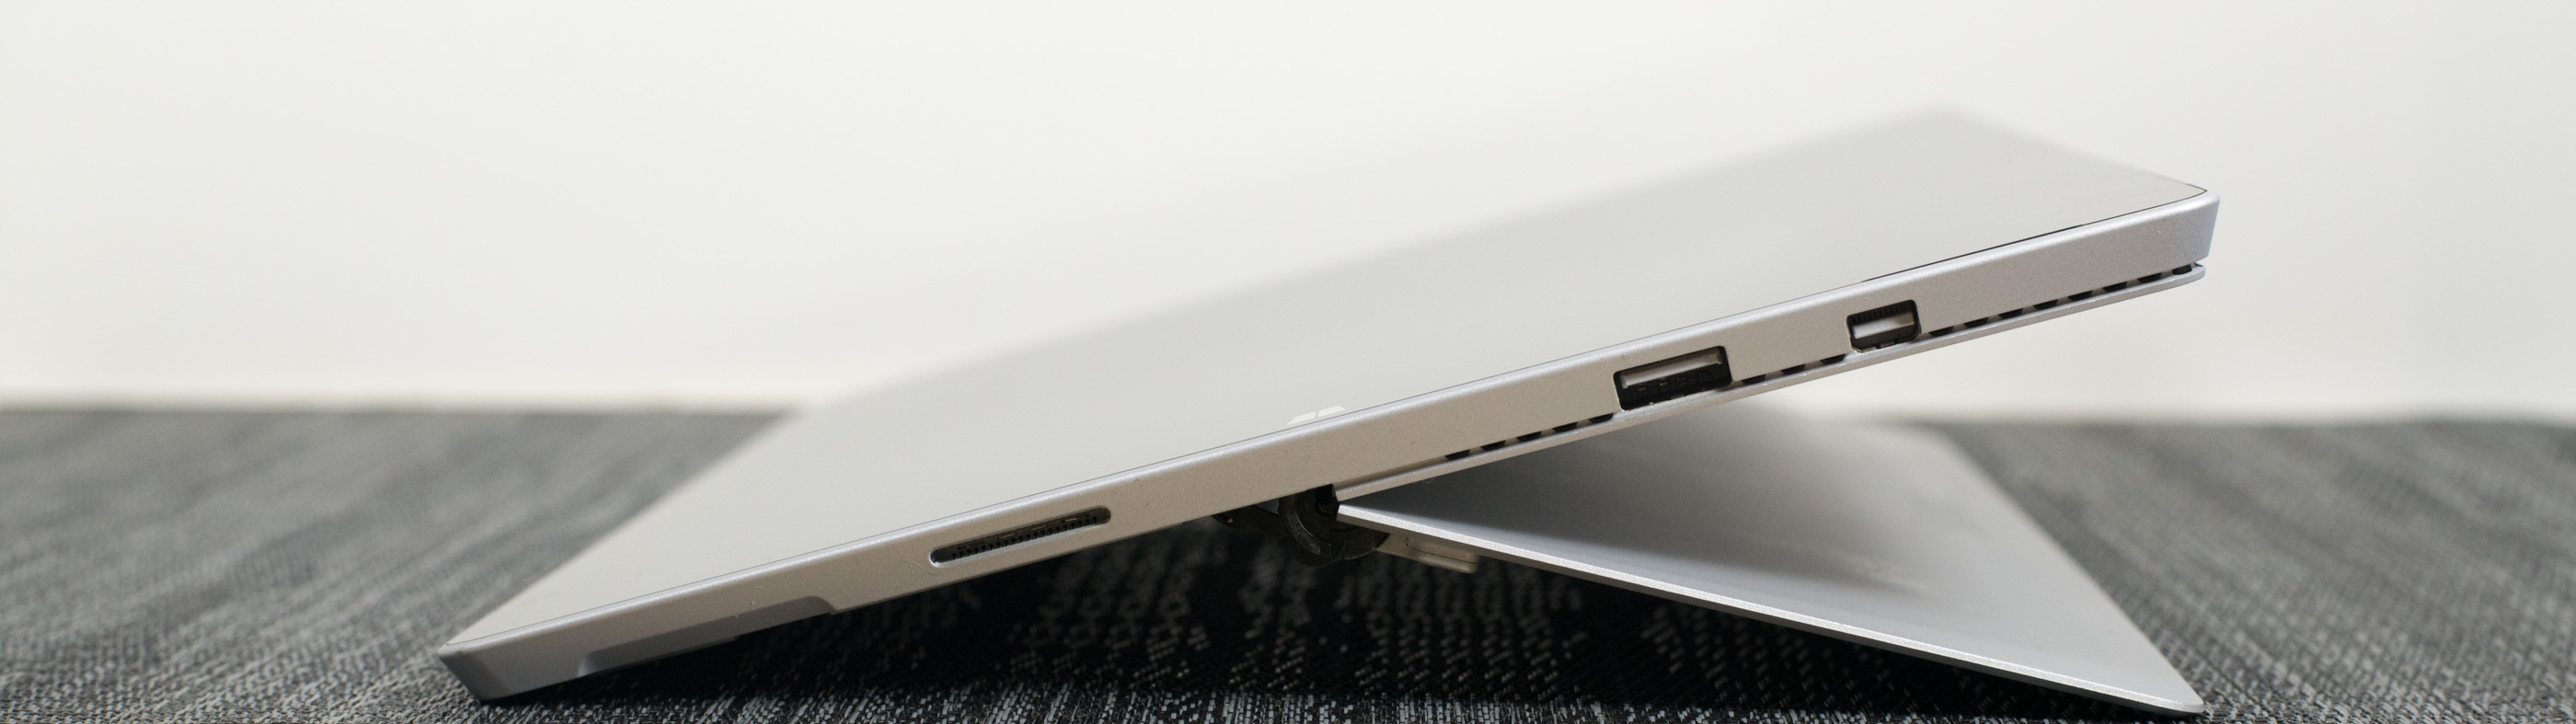 Microsoft Surface Pro 3 Review